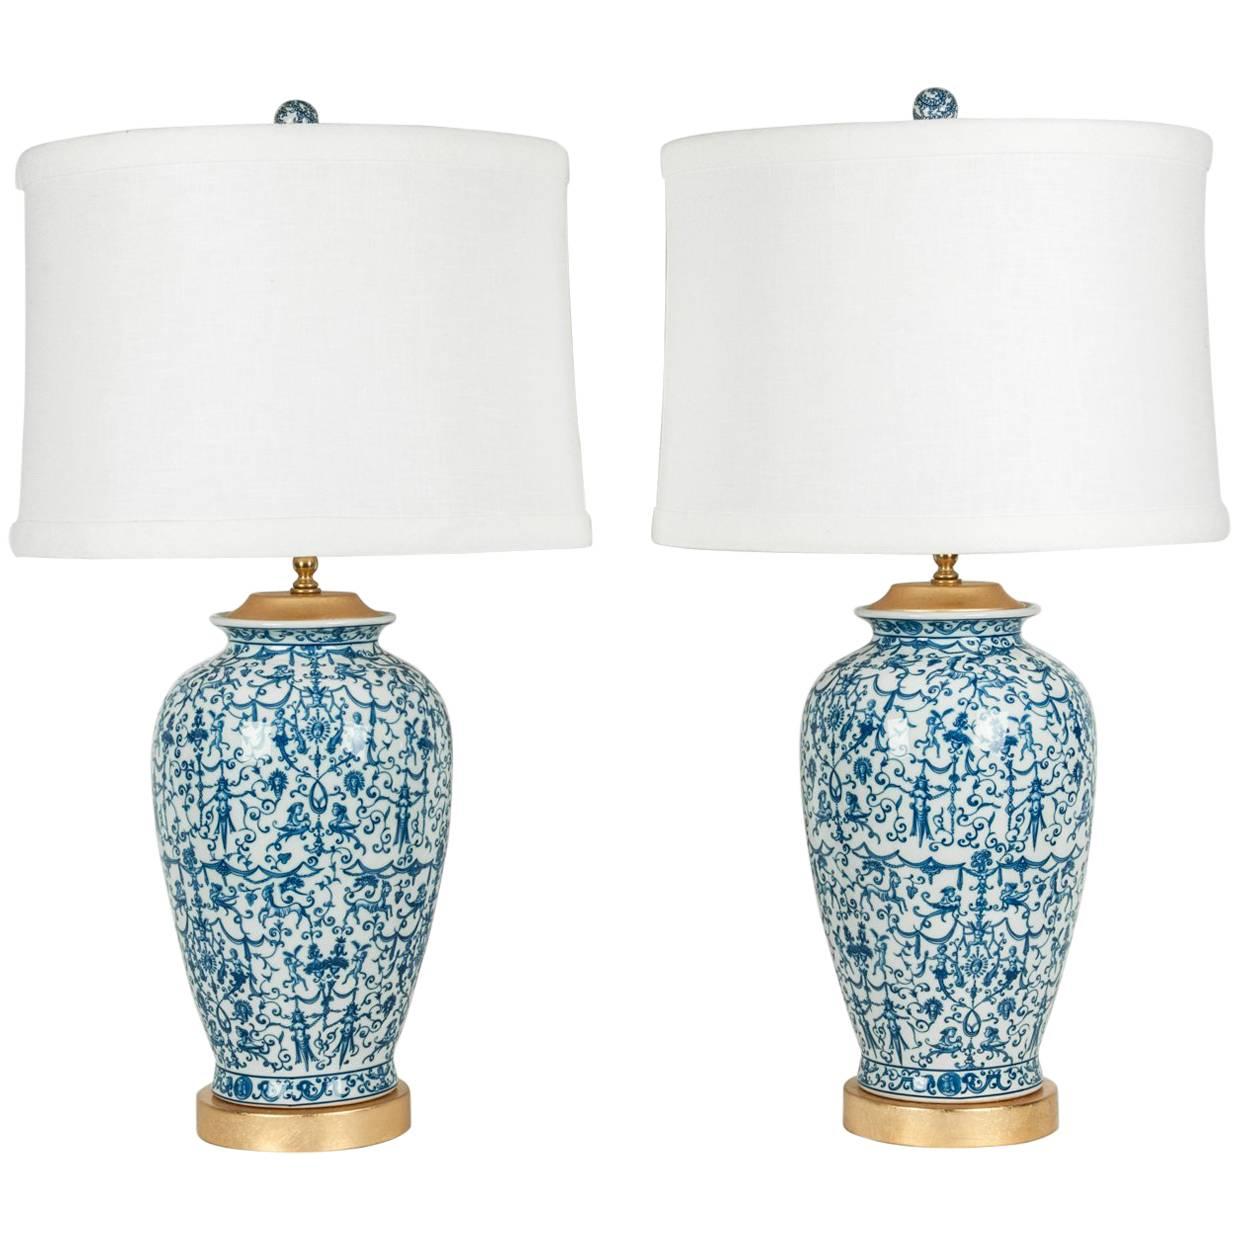 Pair of Porcelain with Wooden Base Gold-Plated Task Table Lamps